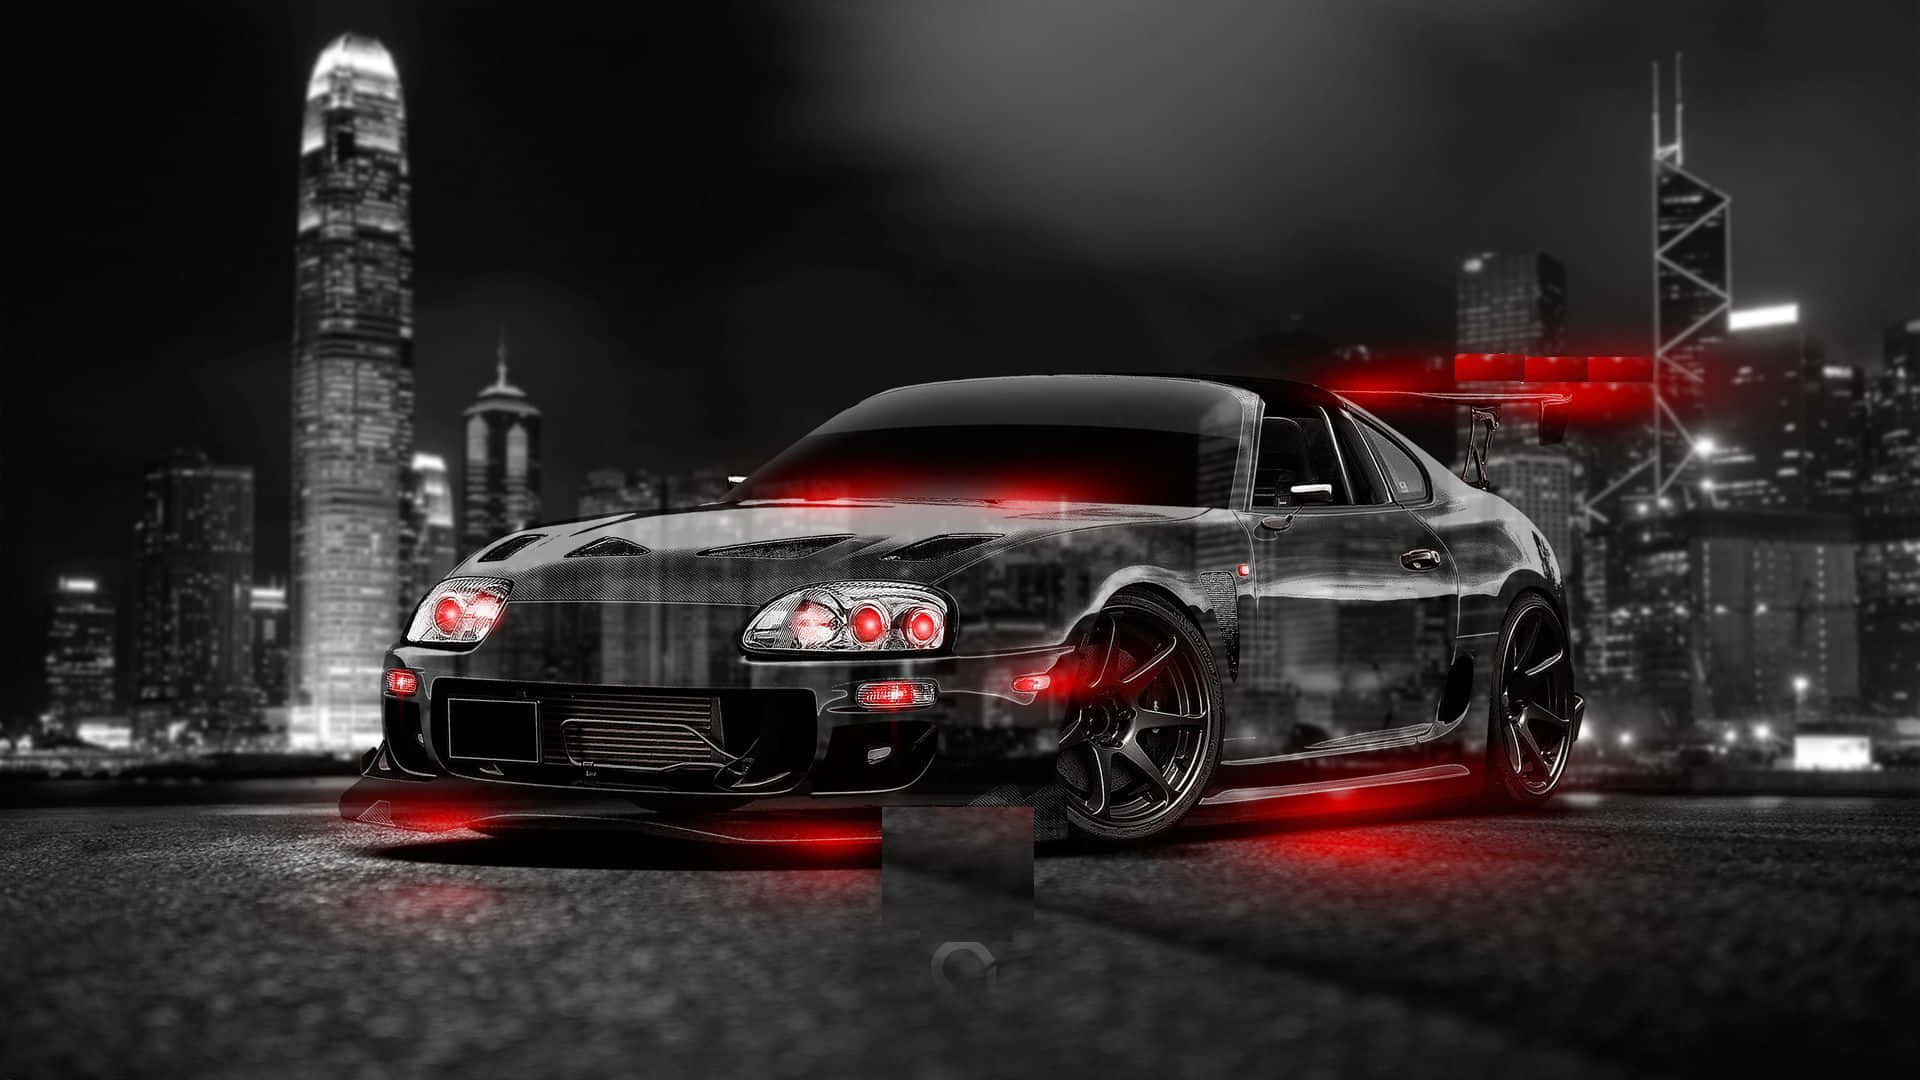 Classic styling and iconic performance power of the JDM Supra Wallpaper